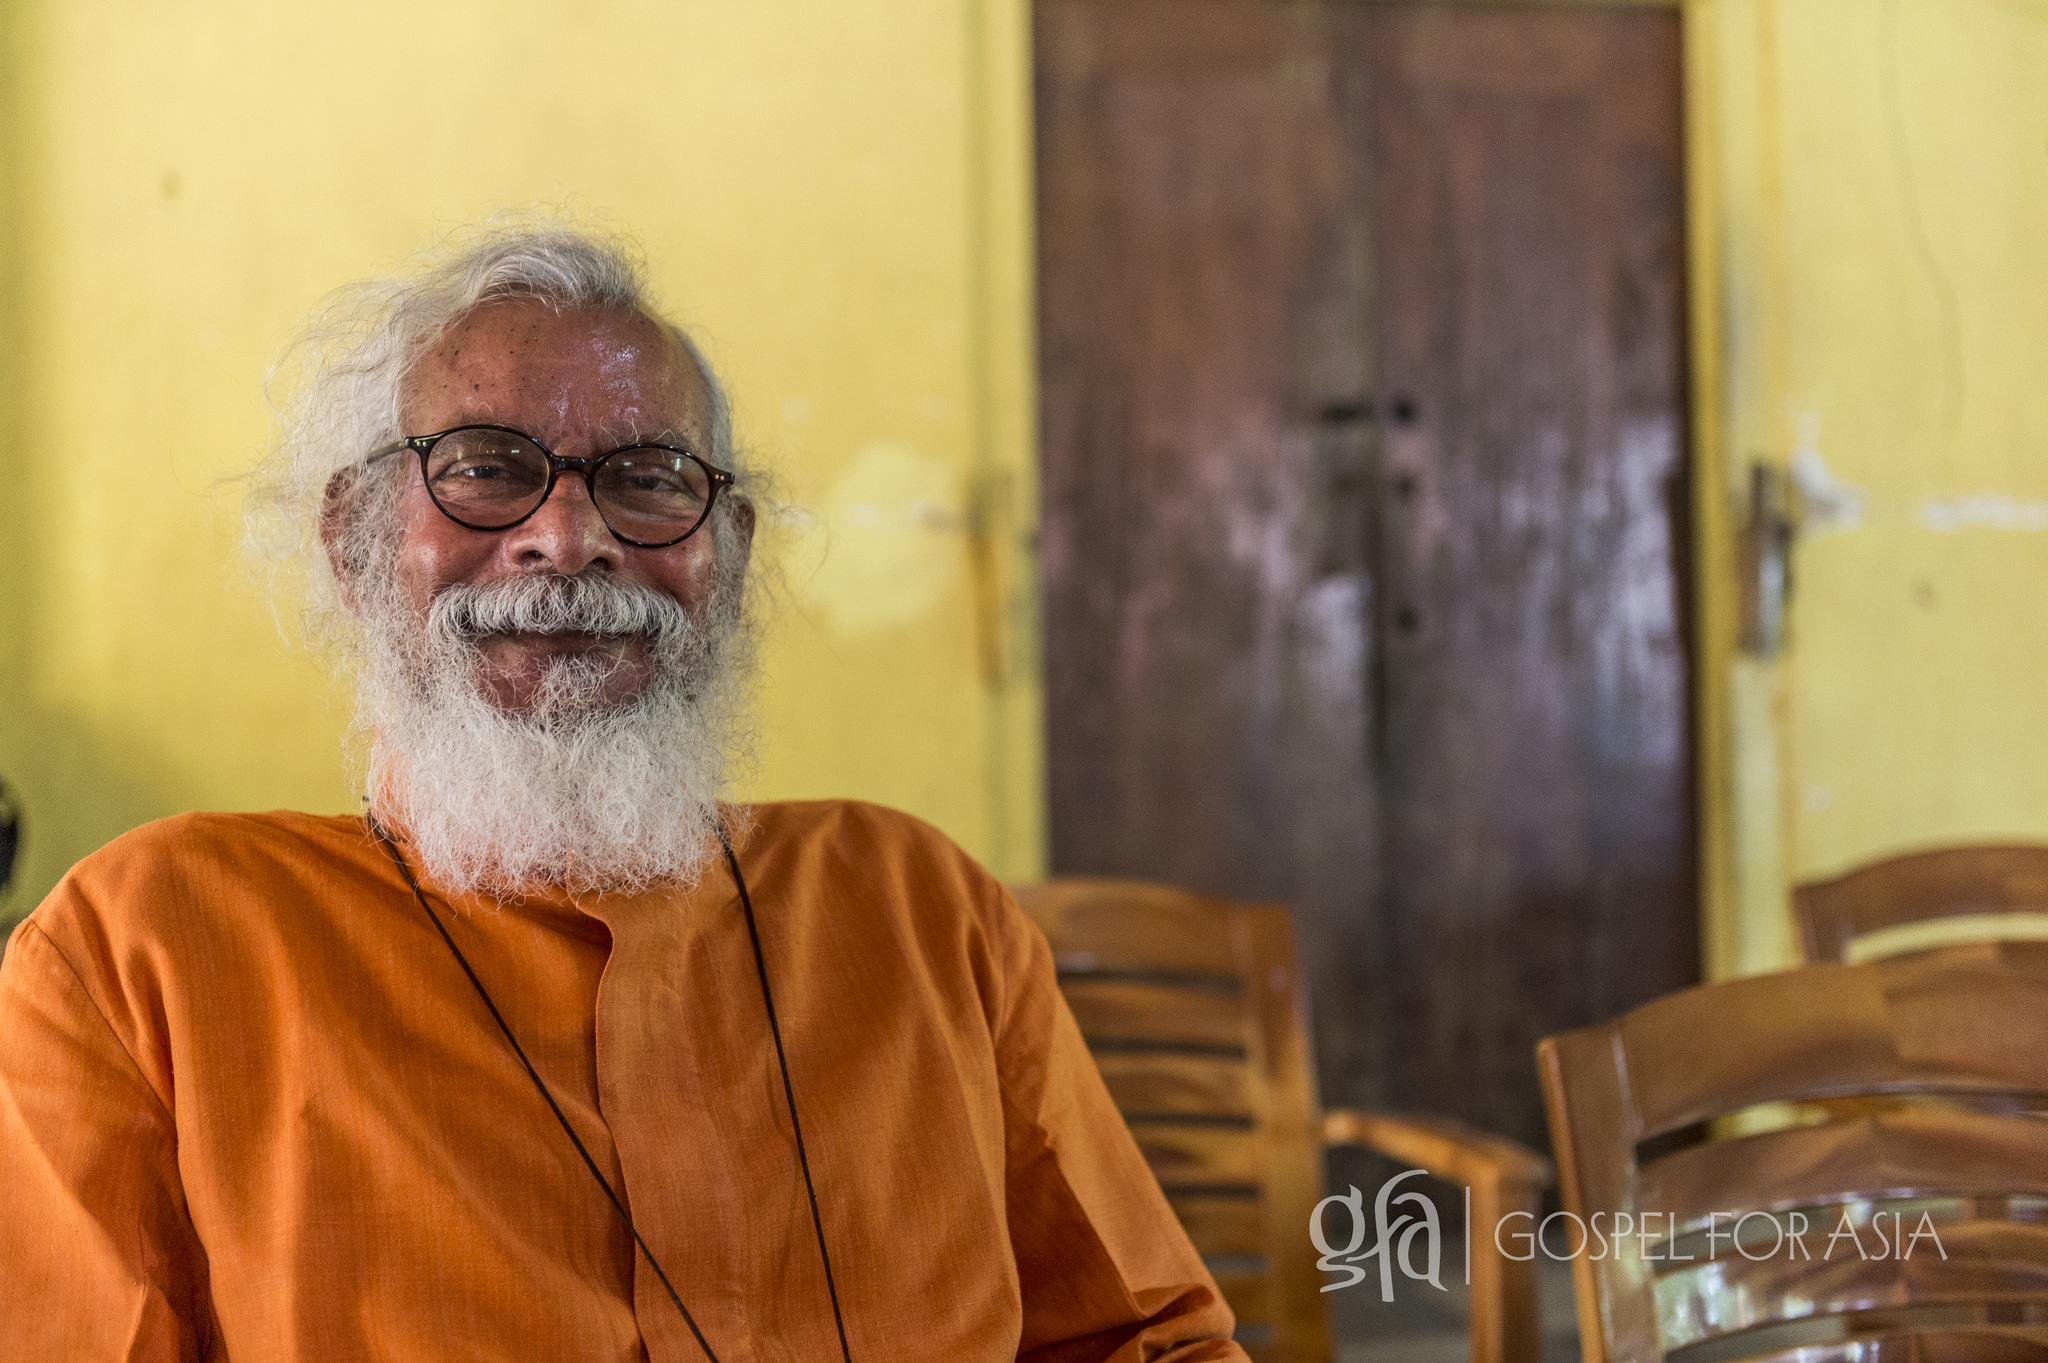 To Be Loved By You - KP Yohannan - Gospel for Asia